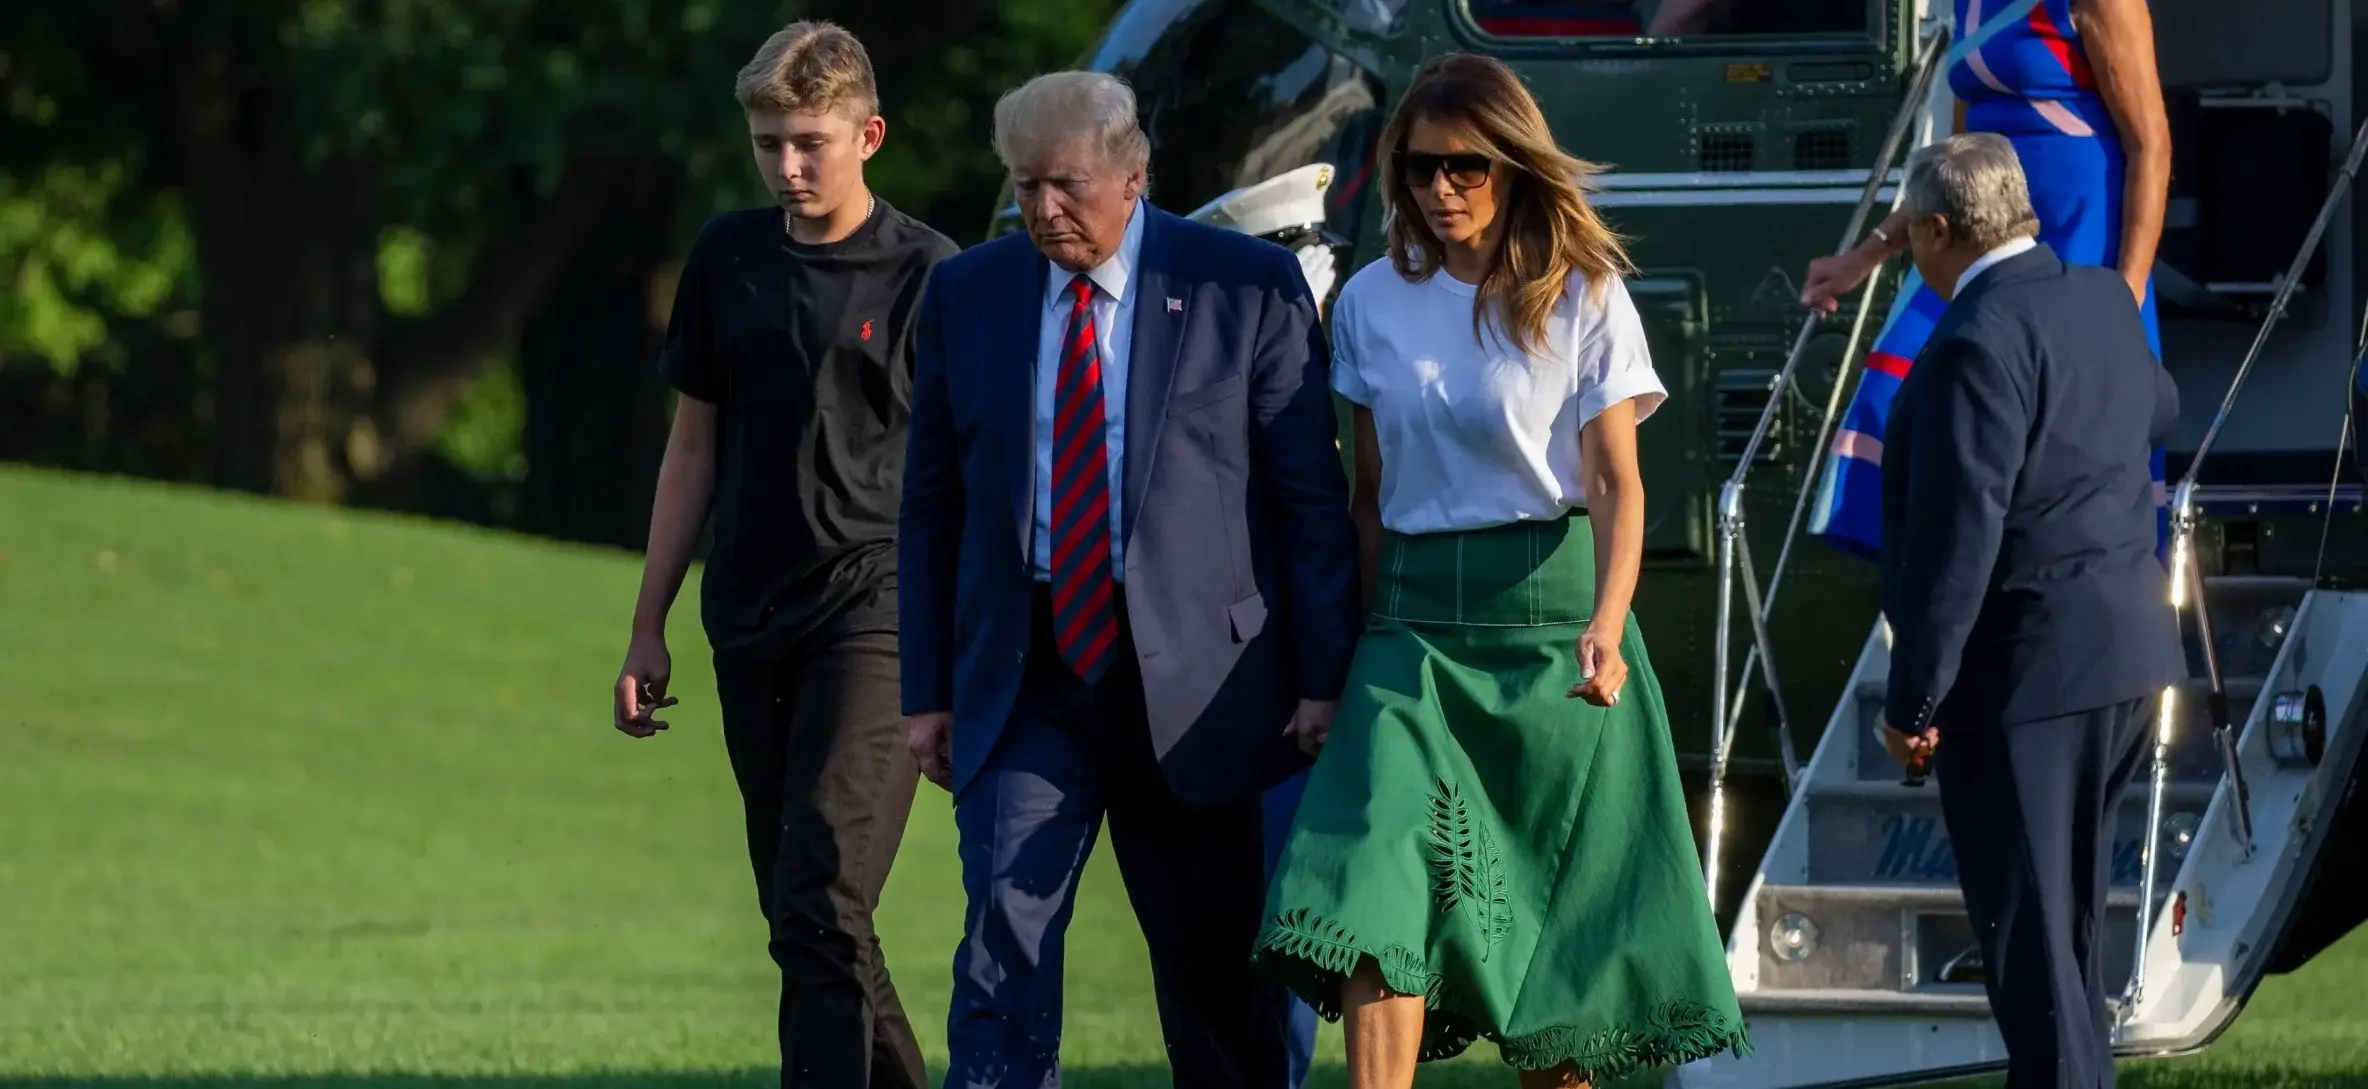 Melania Trump Reportedly Ready To Give Son Barron Space As He ‘Becomes More Public’